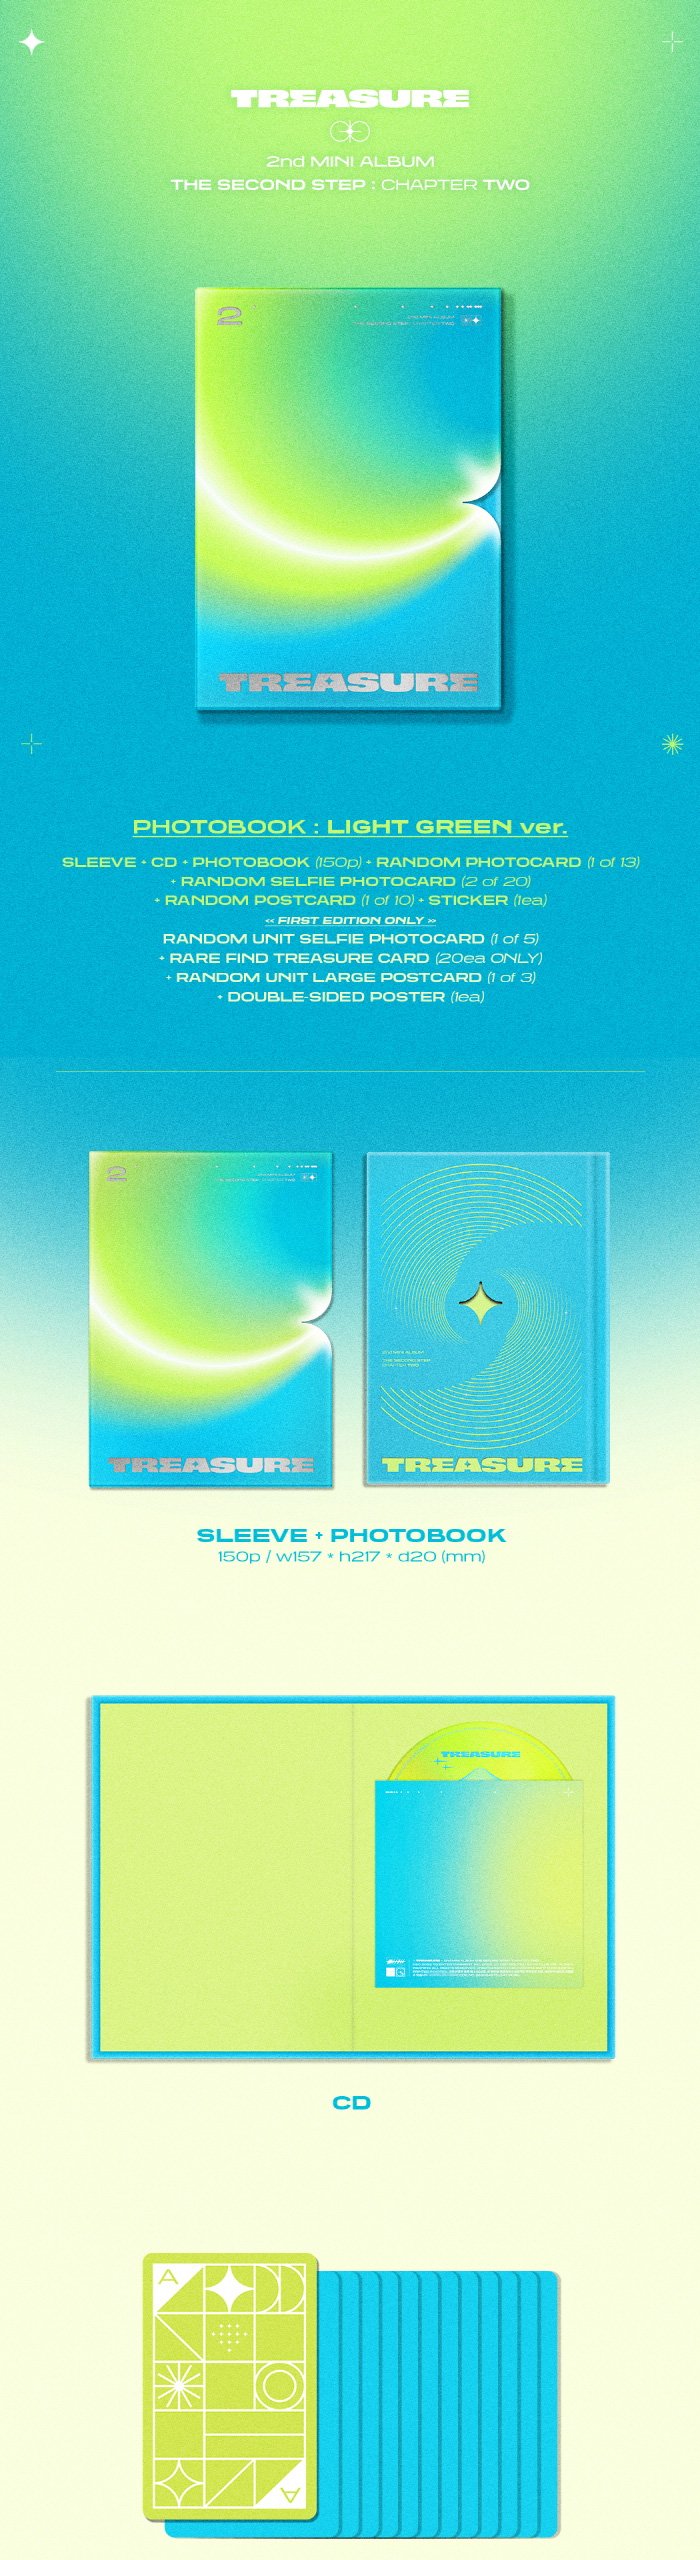 TREASURE - 2nd Mini-Album ‘THE SECOND STEP: CHAPTER TWO’ (Photobook Ver.)